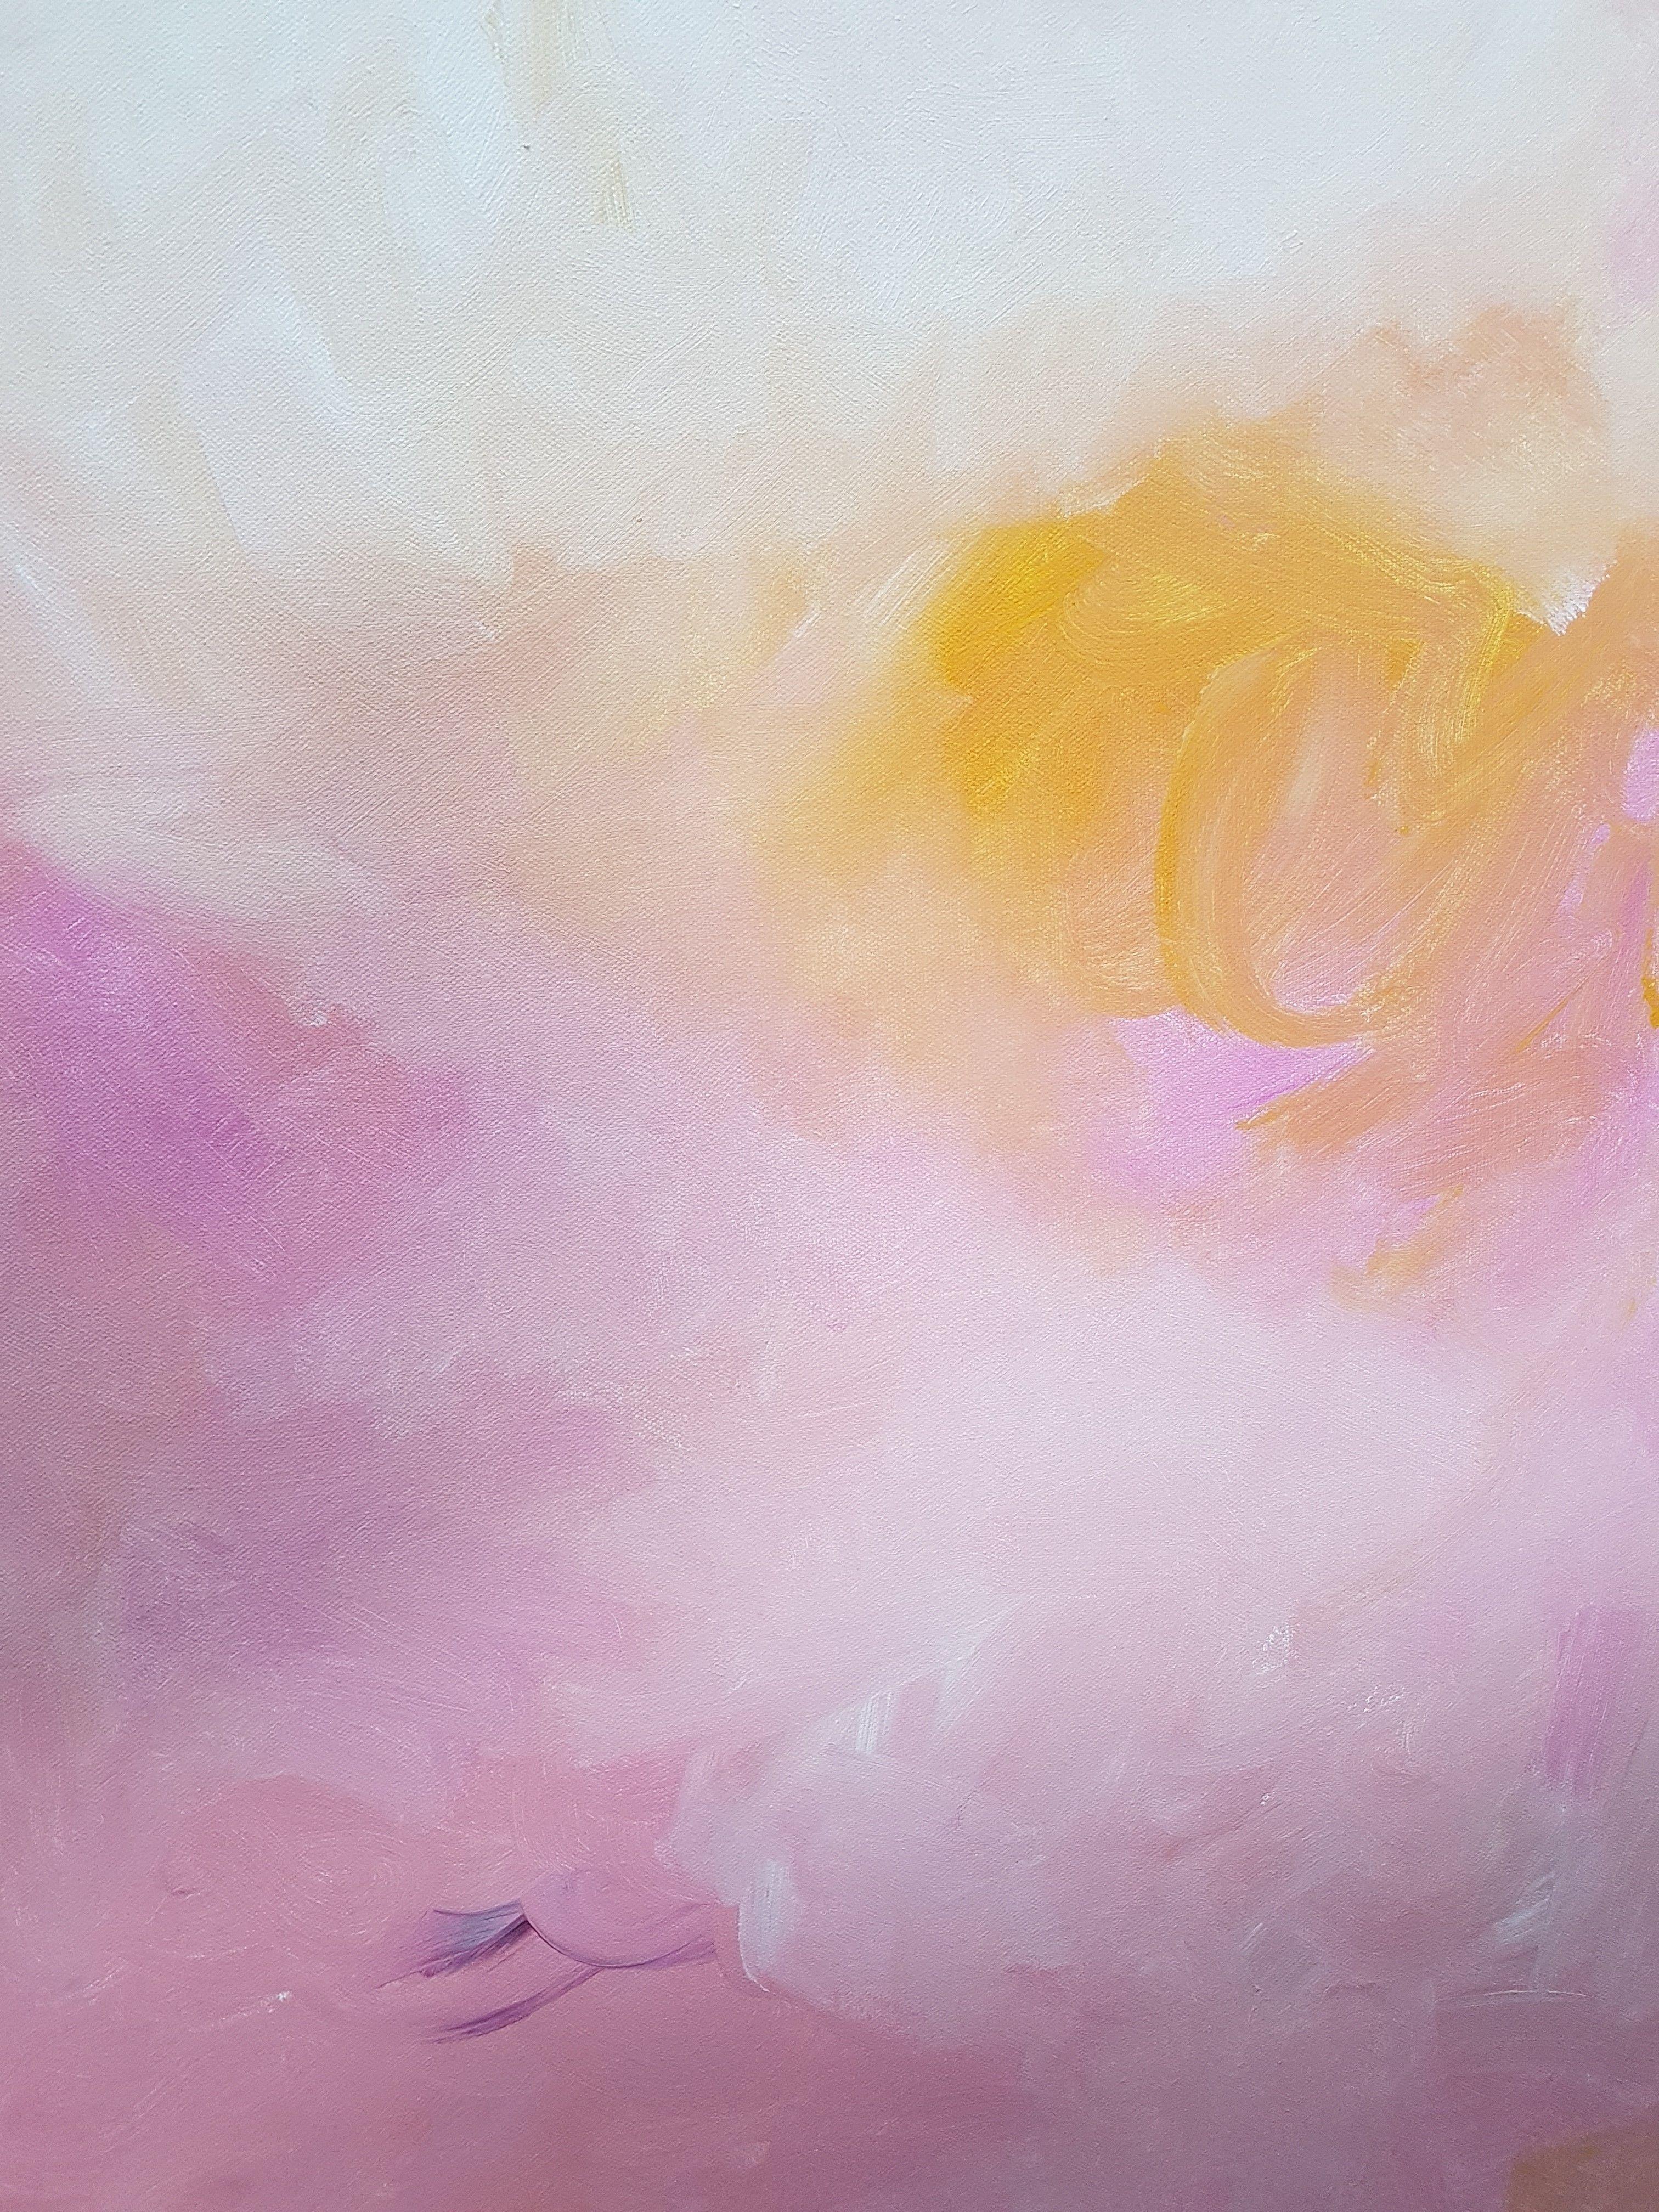 Minimalist abstract expressionism landscape in pastel shades of pink and yellow. The atmosphere is soft and warm, it evokes a landscape with a clear sky above pink vegetation, bushes, a path ... This work is relaxing, calm. :: Painting :: Abstract